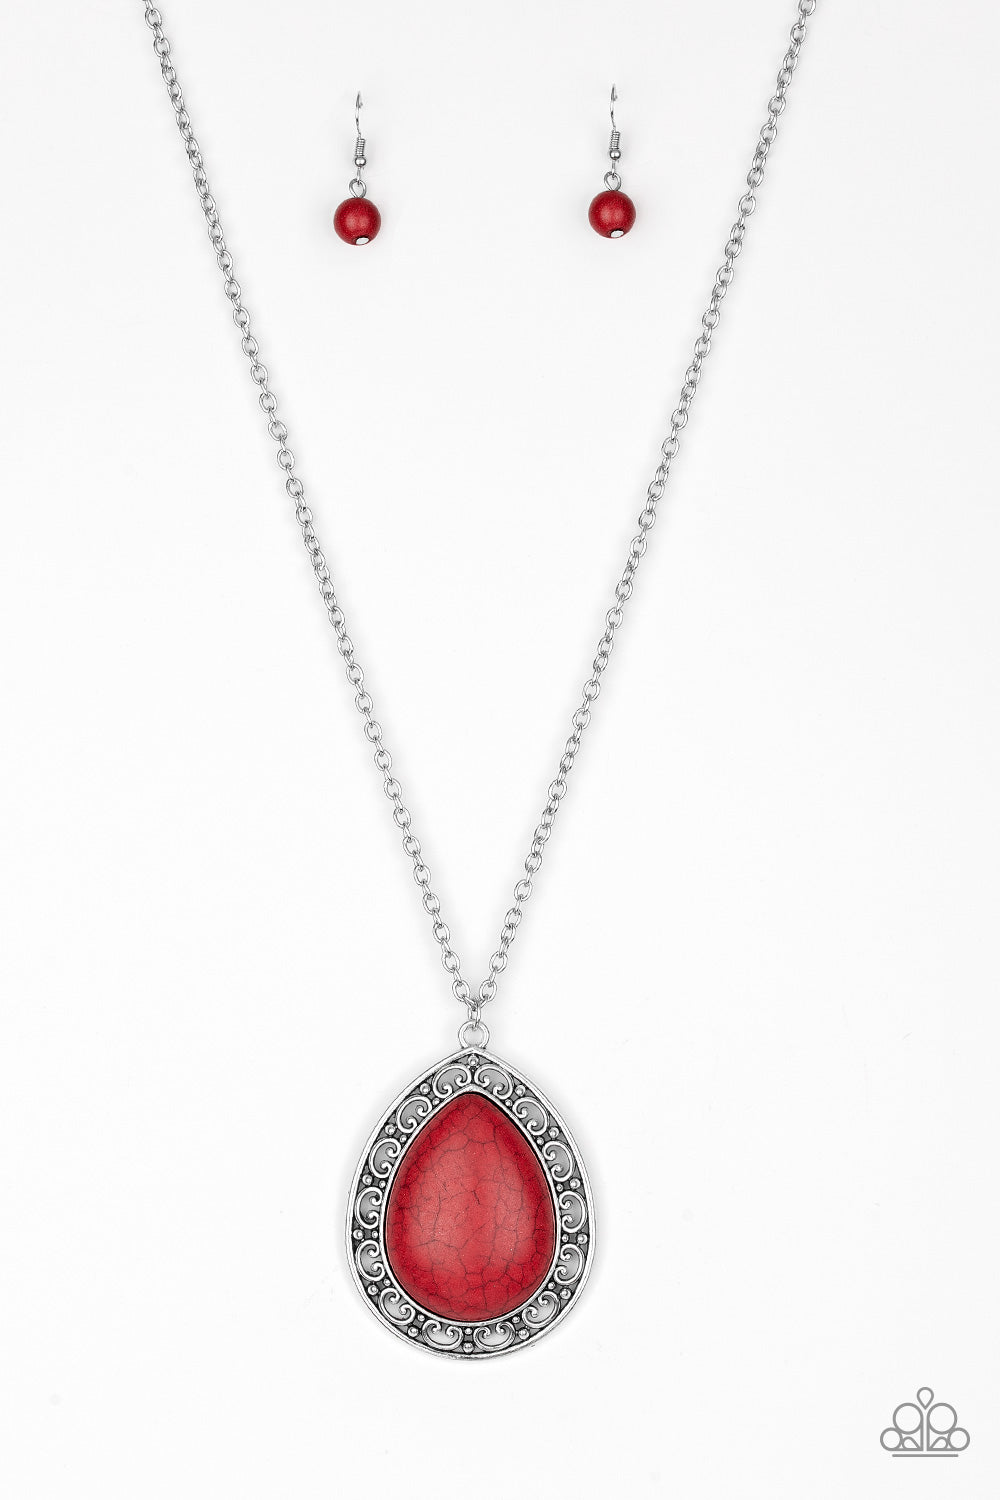 Paparazzi Accessories - Notorious Noble - Red Necklace